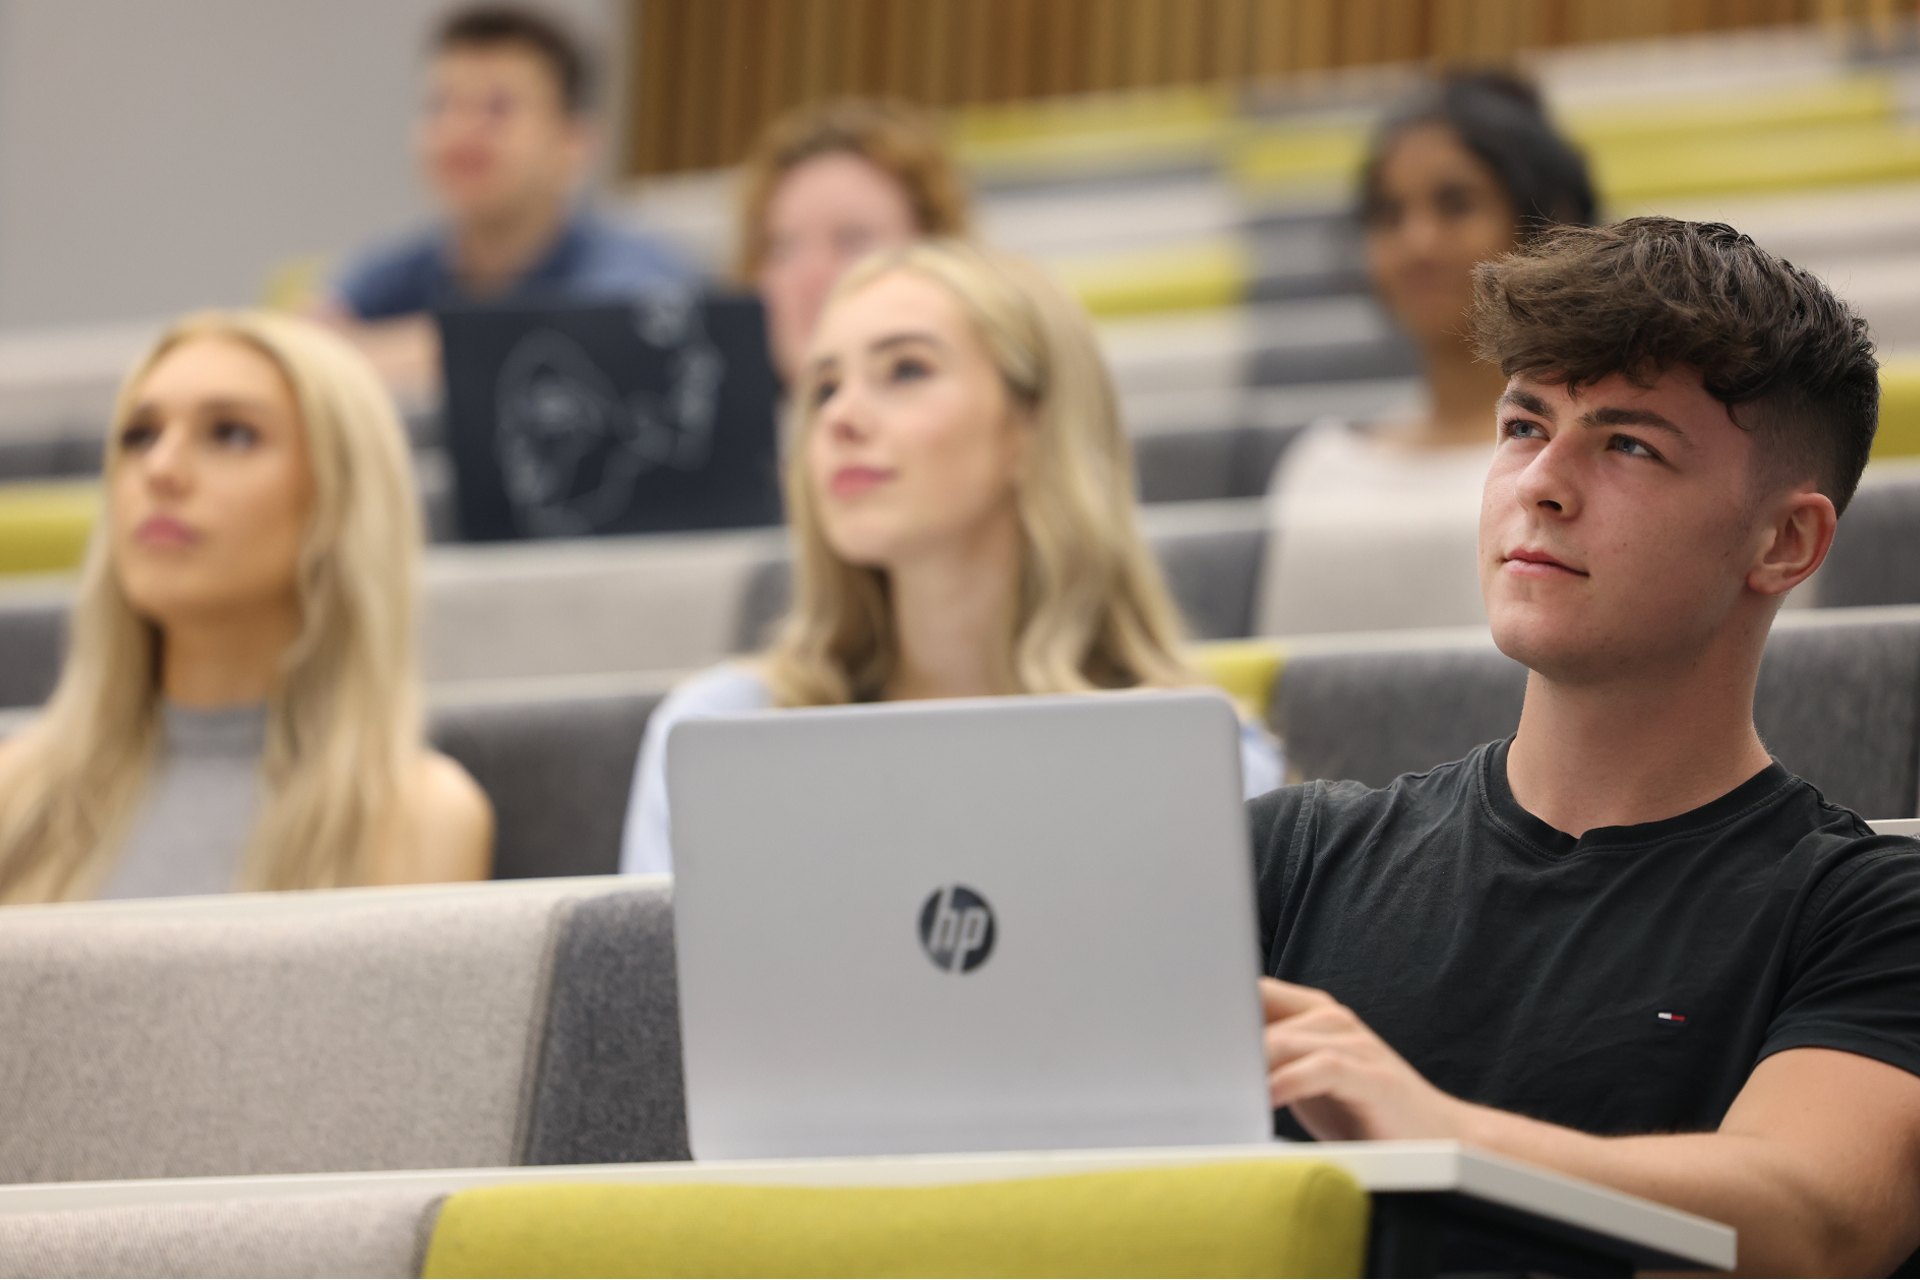 A group of students sitting in a lecture theatre.